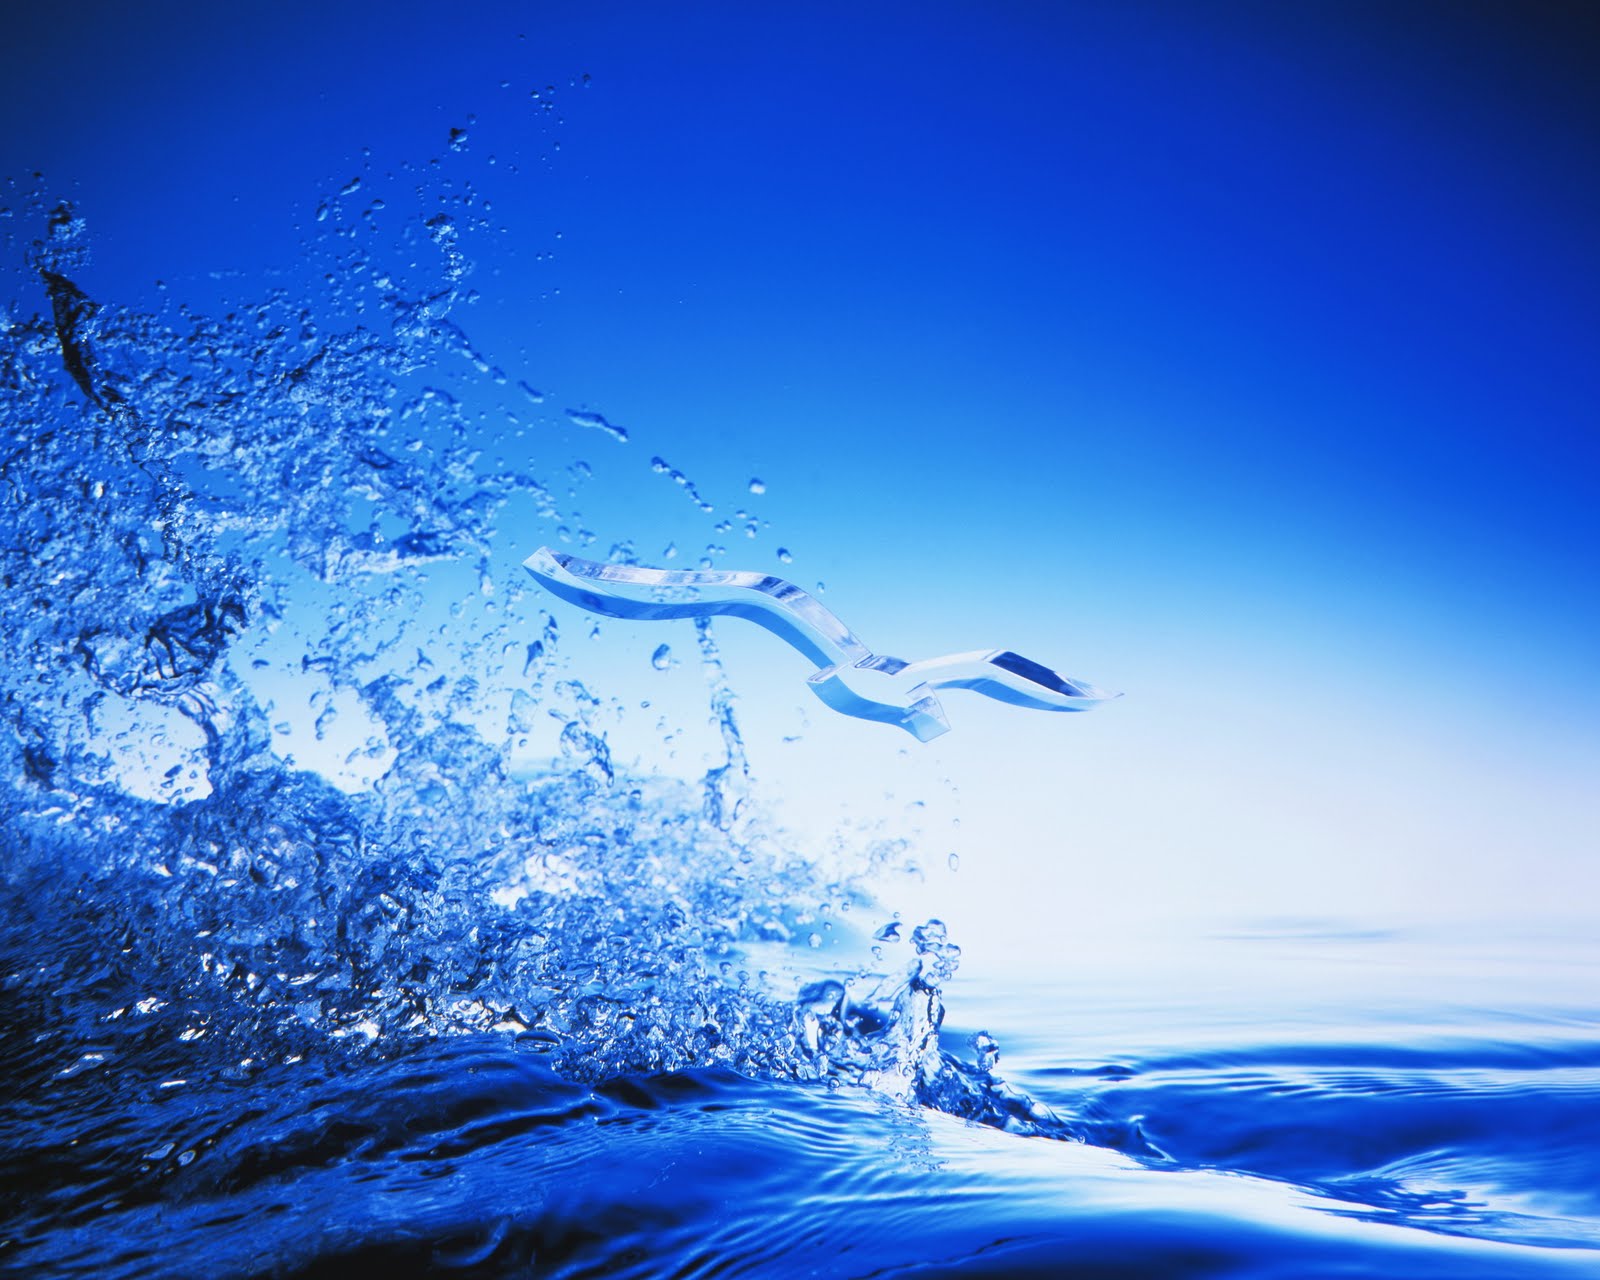 Exclusive royalty free wallpapers of Water